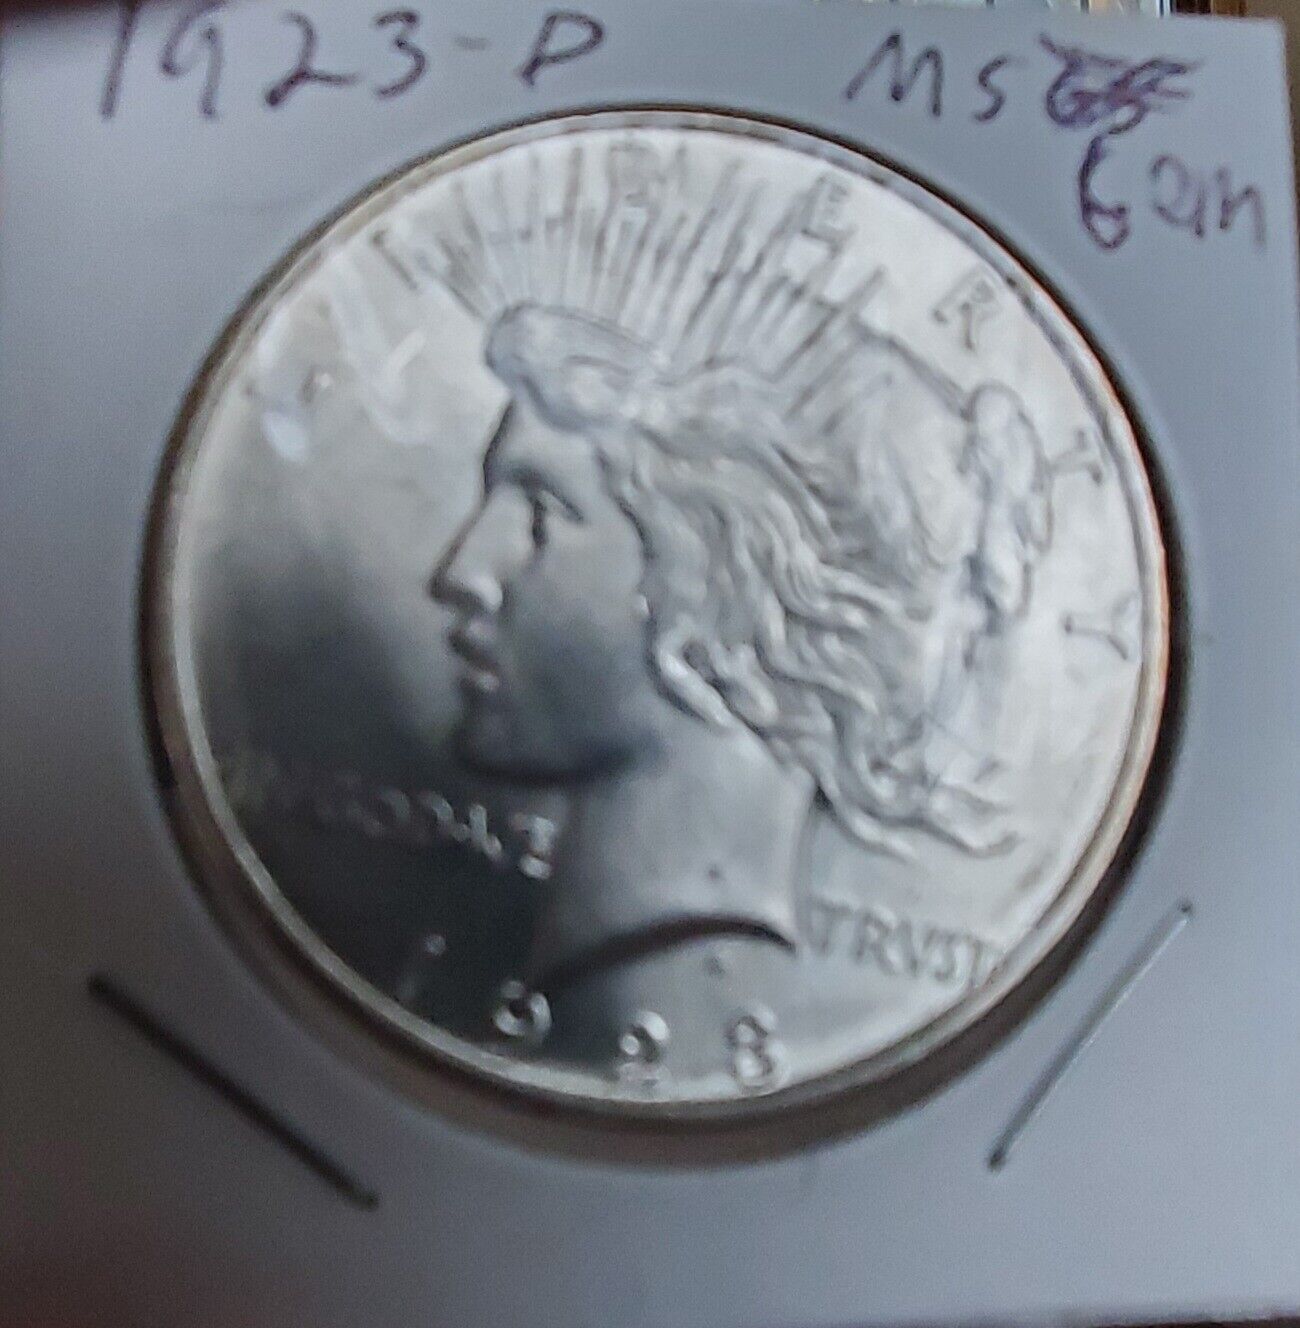 1923-D Recommendation SILVER PEACE DOLLAR - BLAST GEM WHITE UNCIRCULATED Japan Maker New